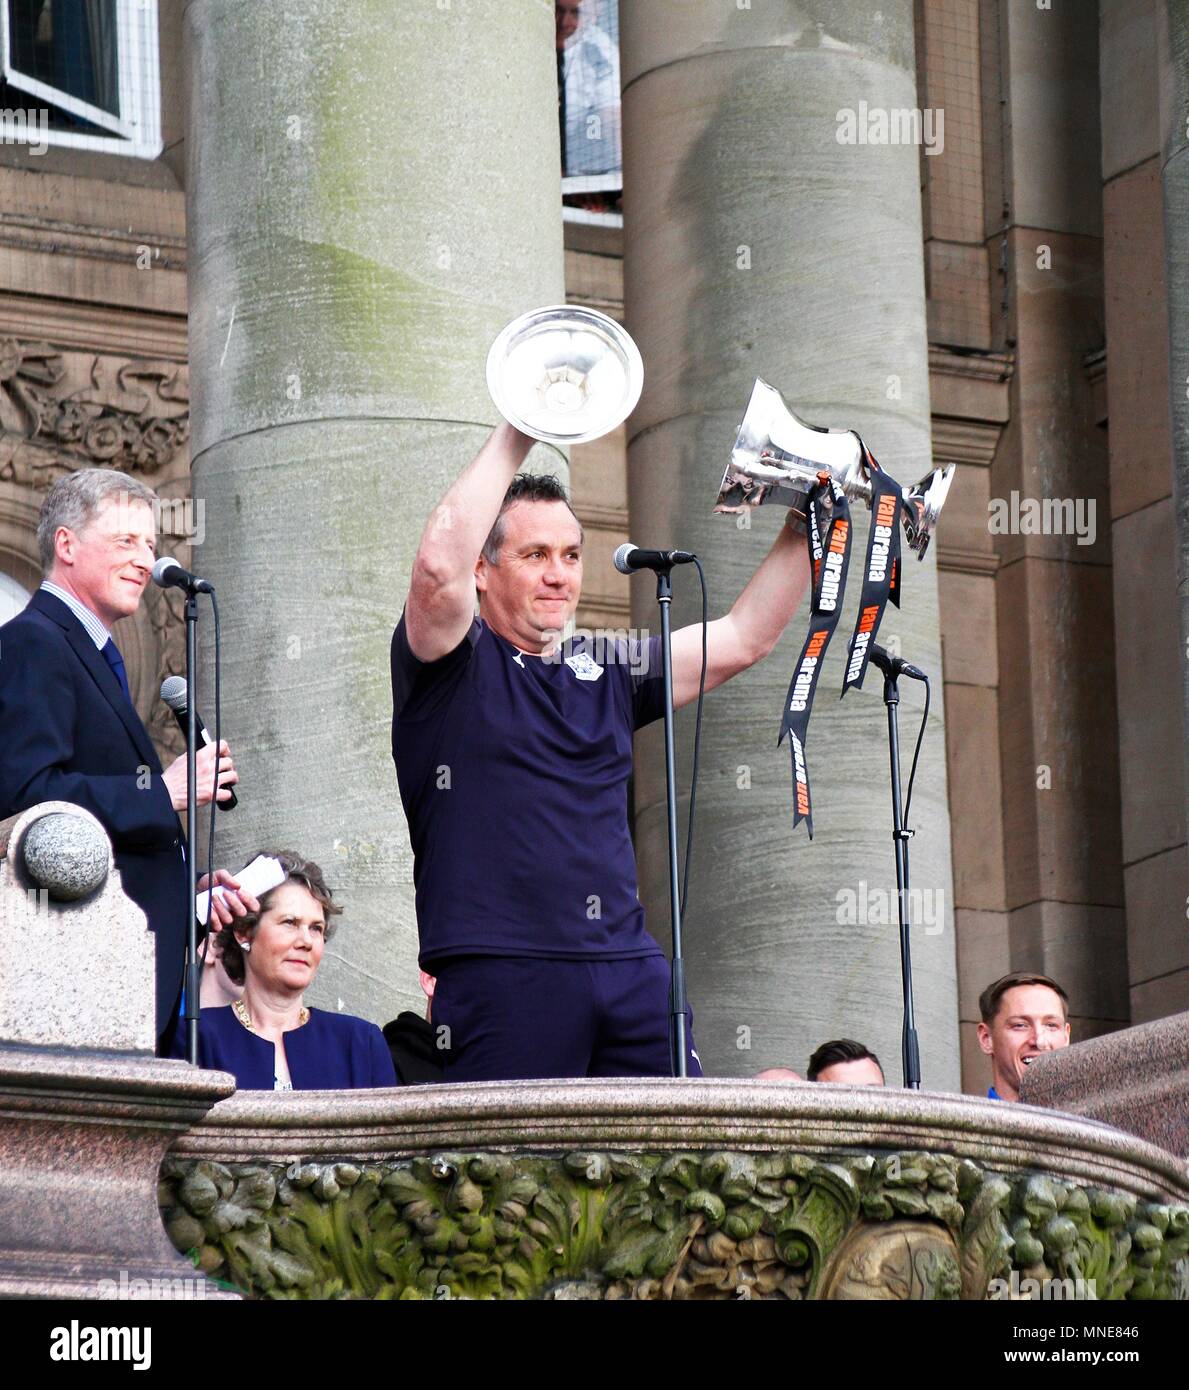 Wirral, Merseyside, 16/05/2018 Tranmere rovers football club have civic celebration to celebrate the teams promotion to the Football leauge, Credit Ian Fairbrother / Alamy Stock Photo